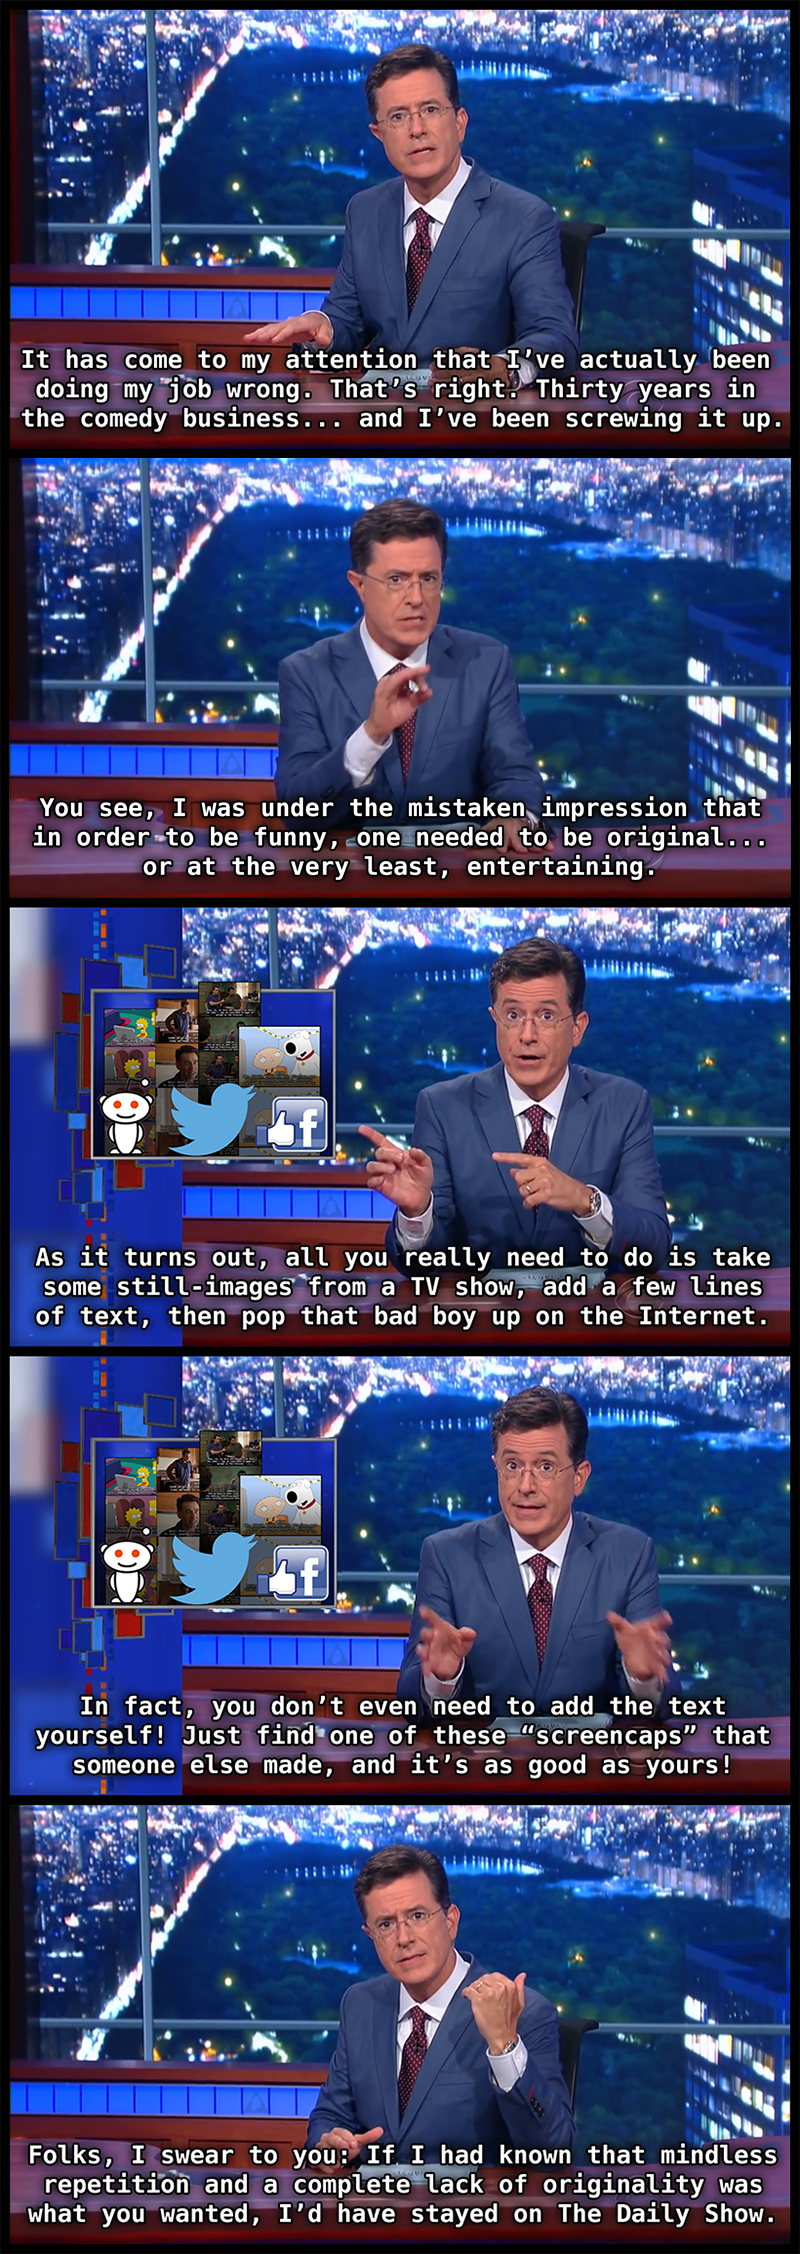 Stephen Colbert is getting pretty snarky.